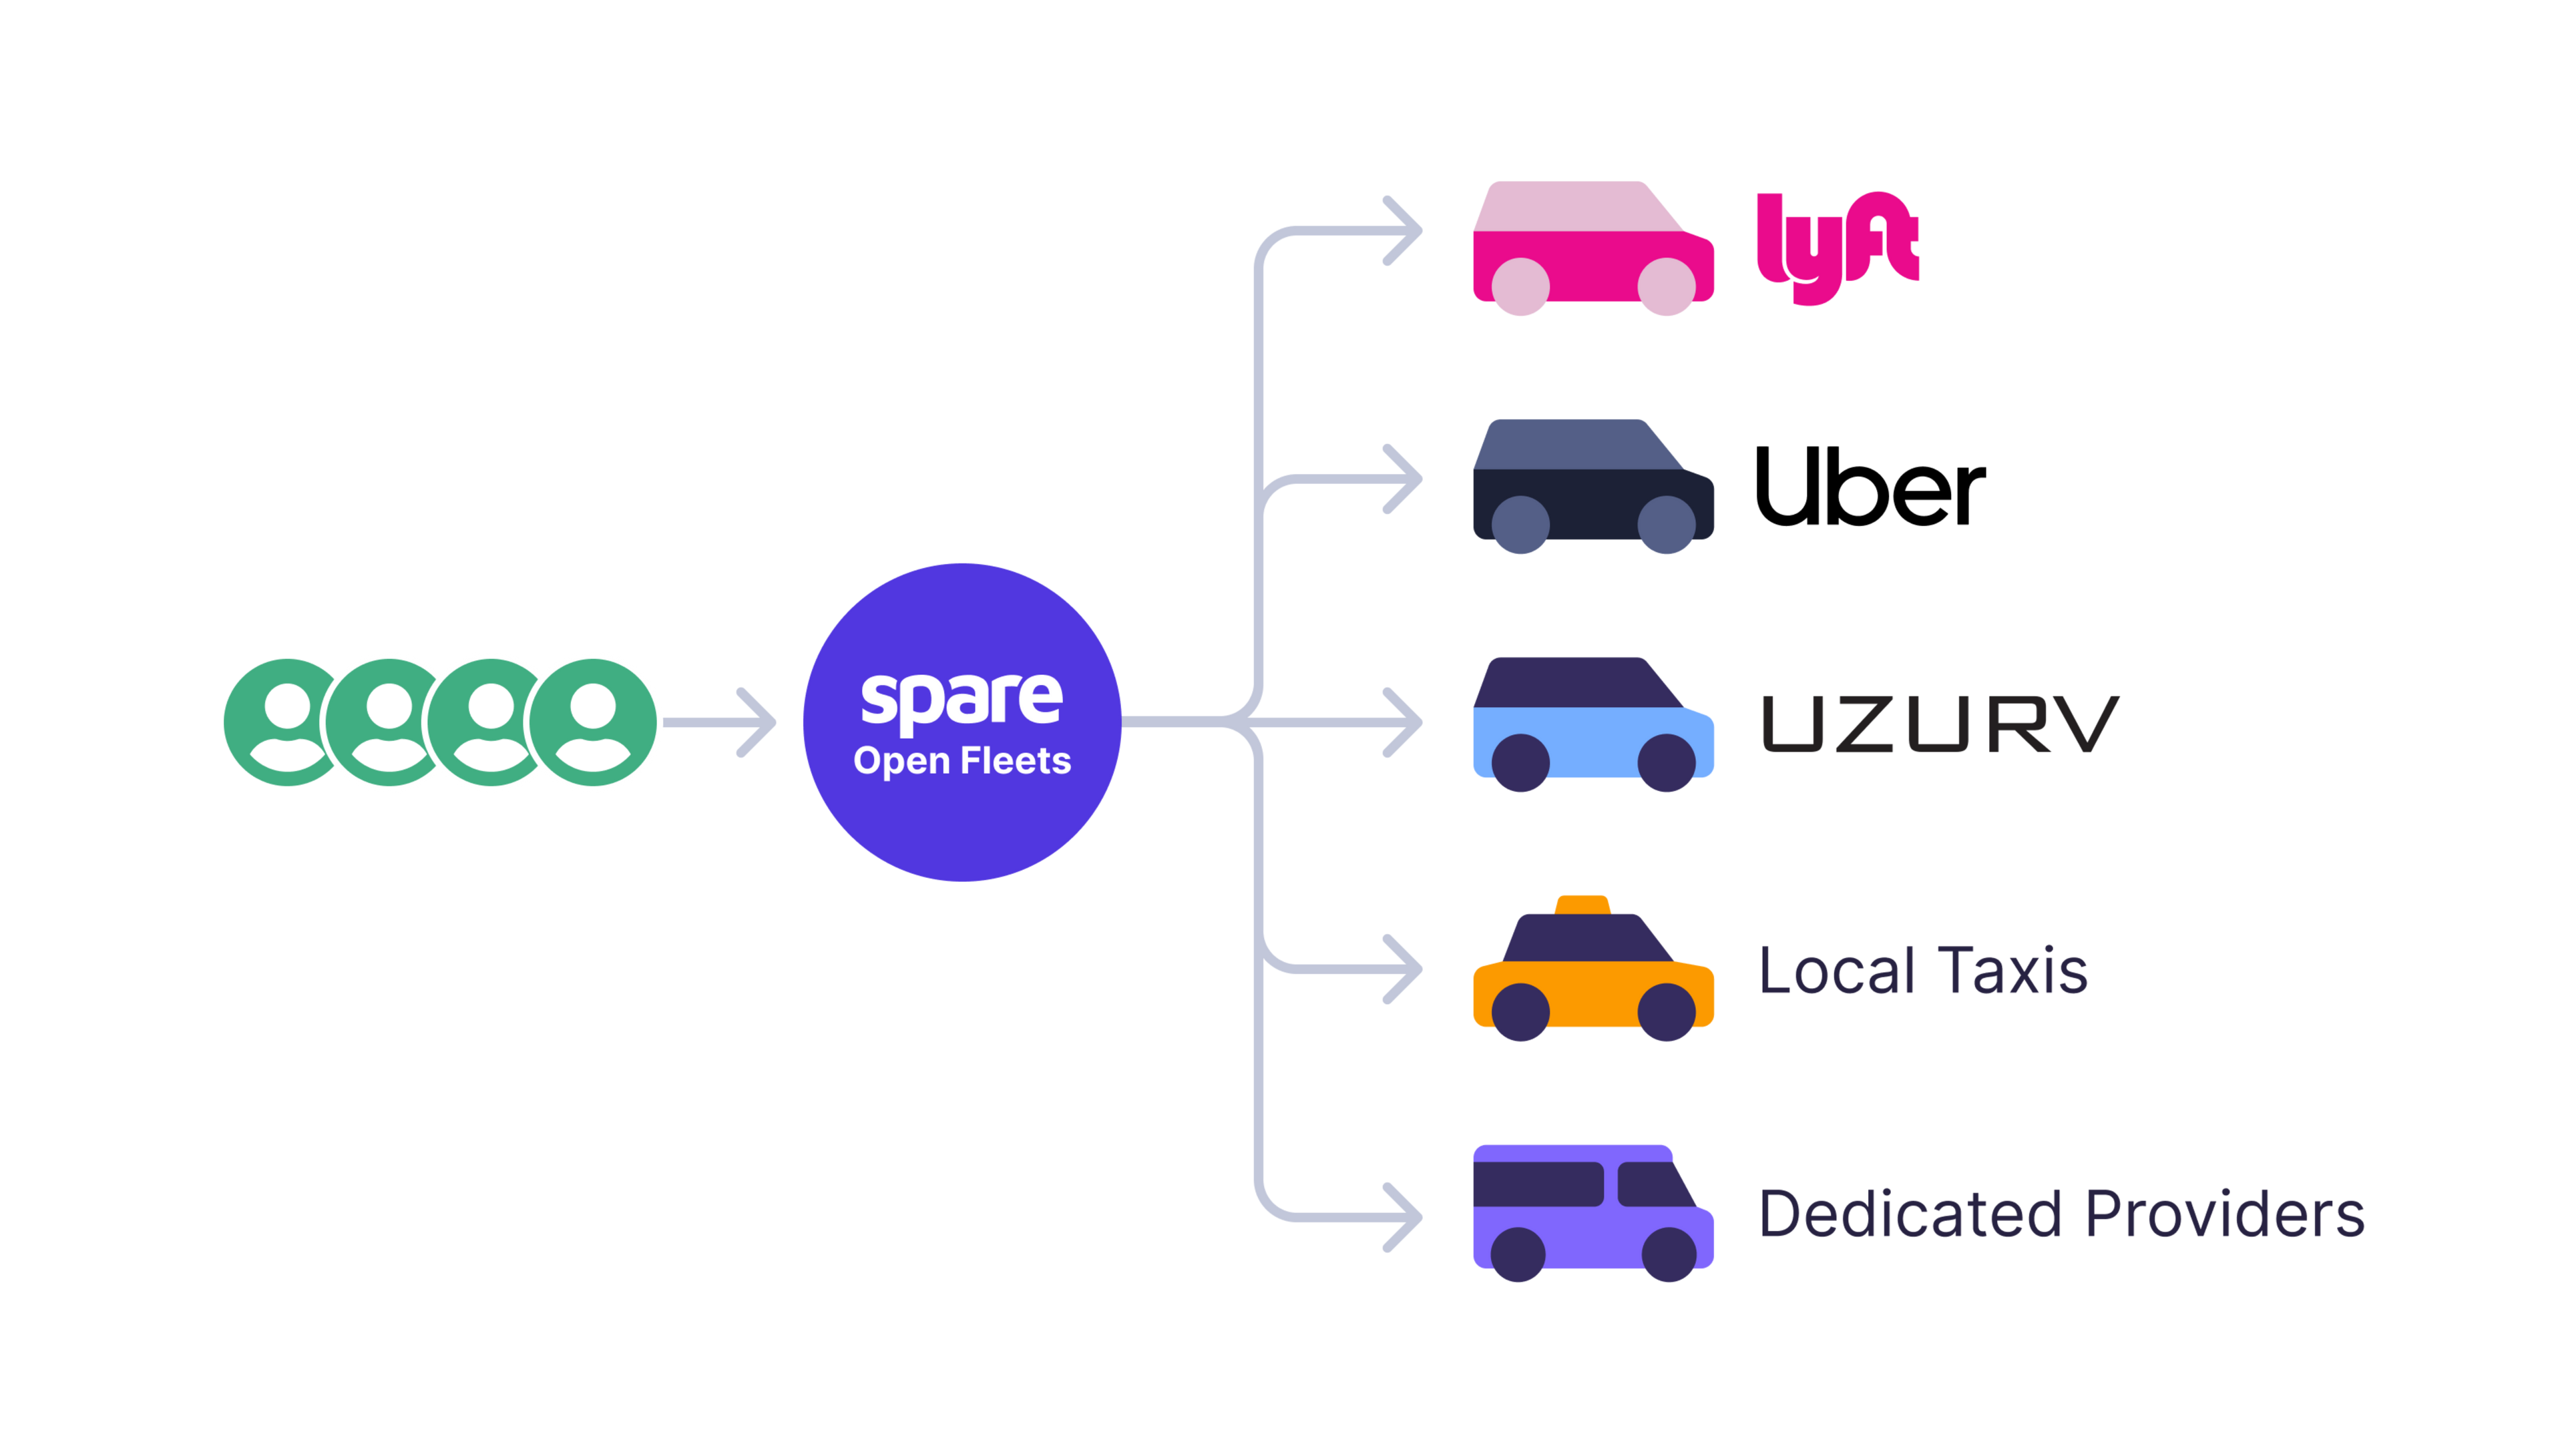 An image showing Spare Open Fleets integrating various fleet providers including Lyft, Uber, UZURV, Local Taxis and Dedicated Providers.